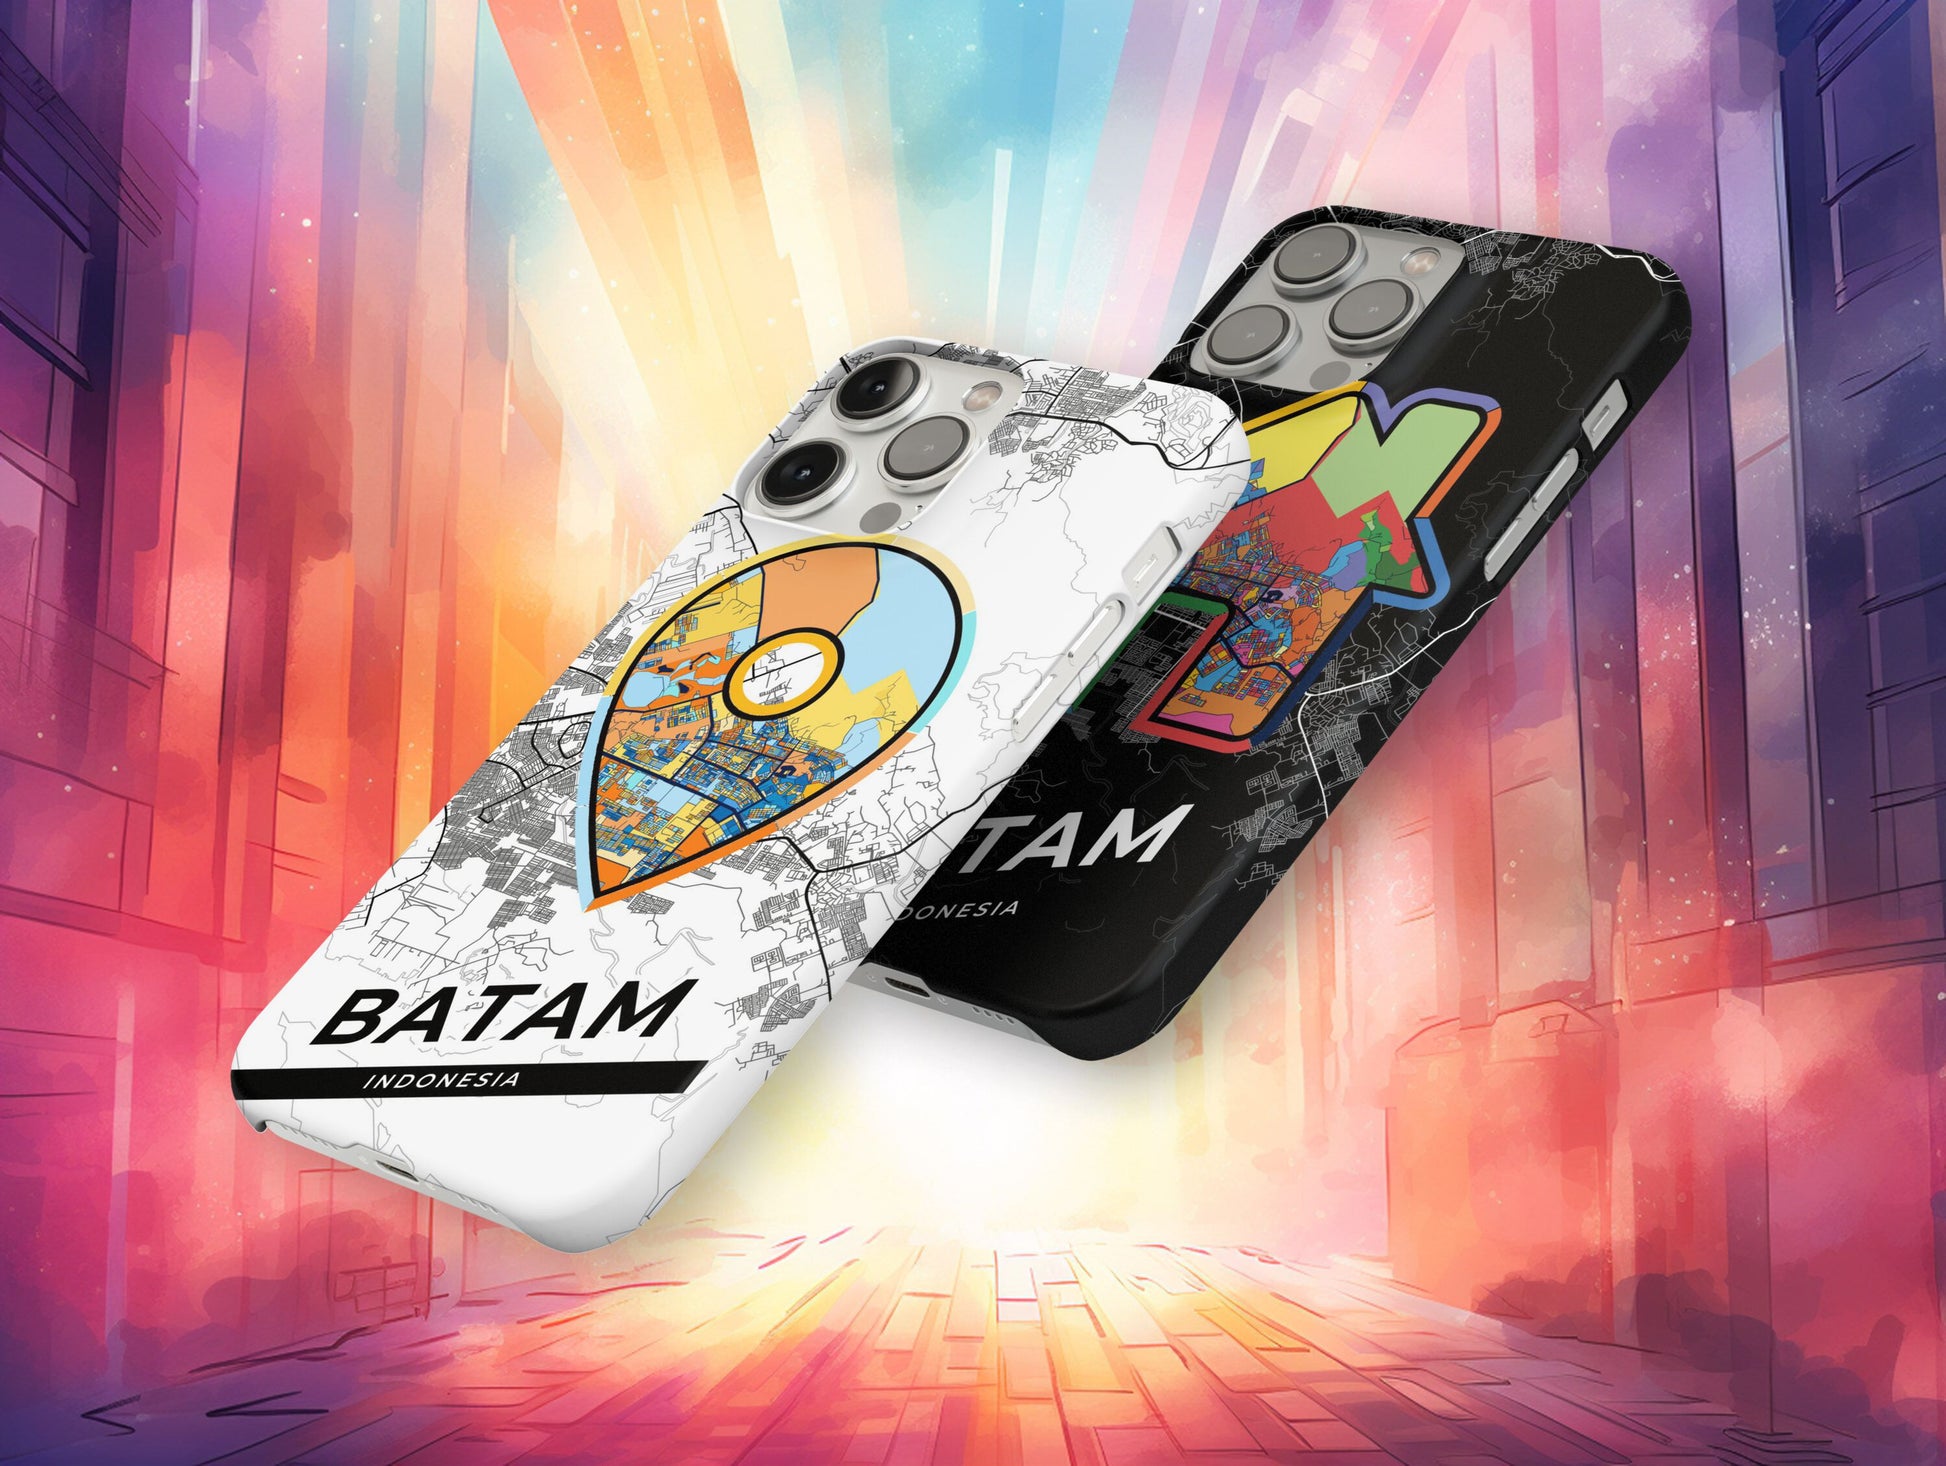 Batam Indonesia slim phone case with colorful icon. Birthday, wedding or housewarming gift. Couple match cases.